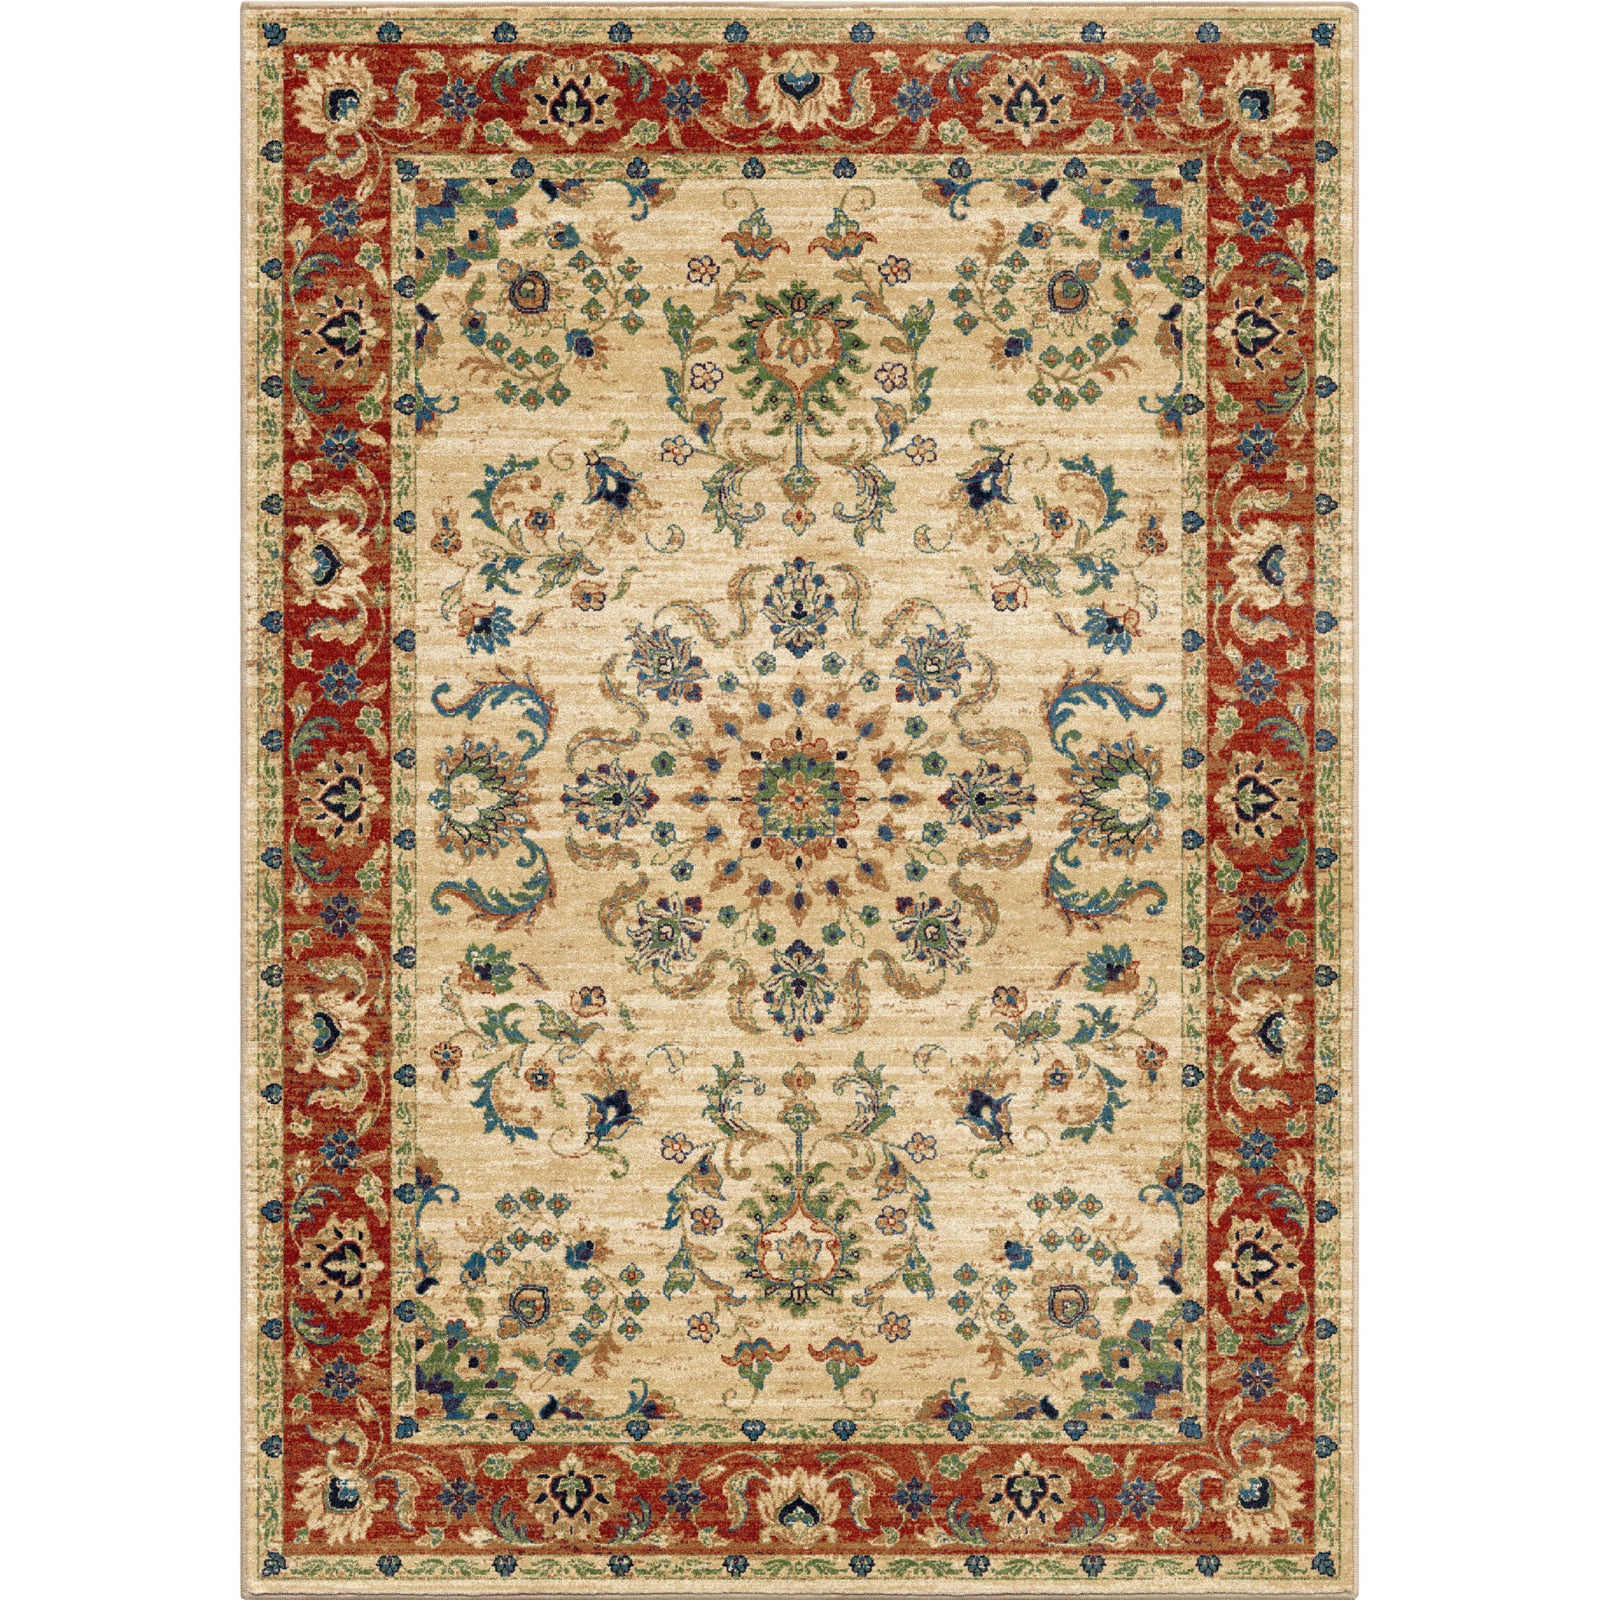 Orian Rugs Berkley Twisted Tradition Ivory Area Rug main image